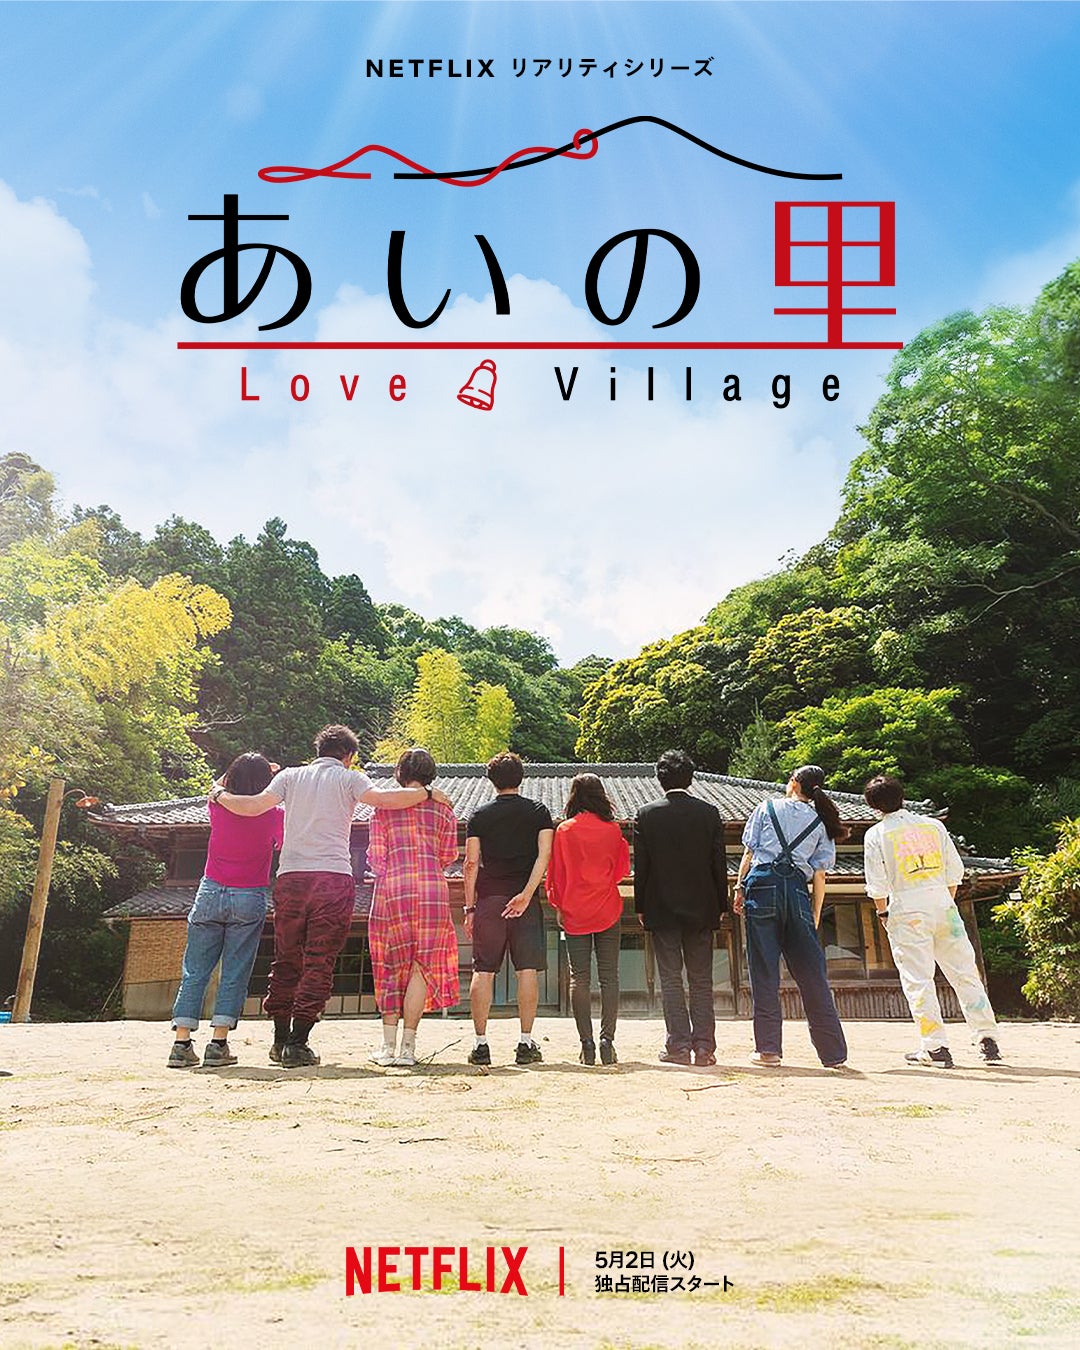 TV ratings for Love Village (あいの里) in Canada. Netflix TV series